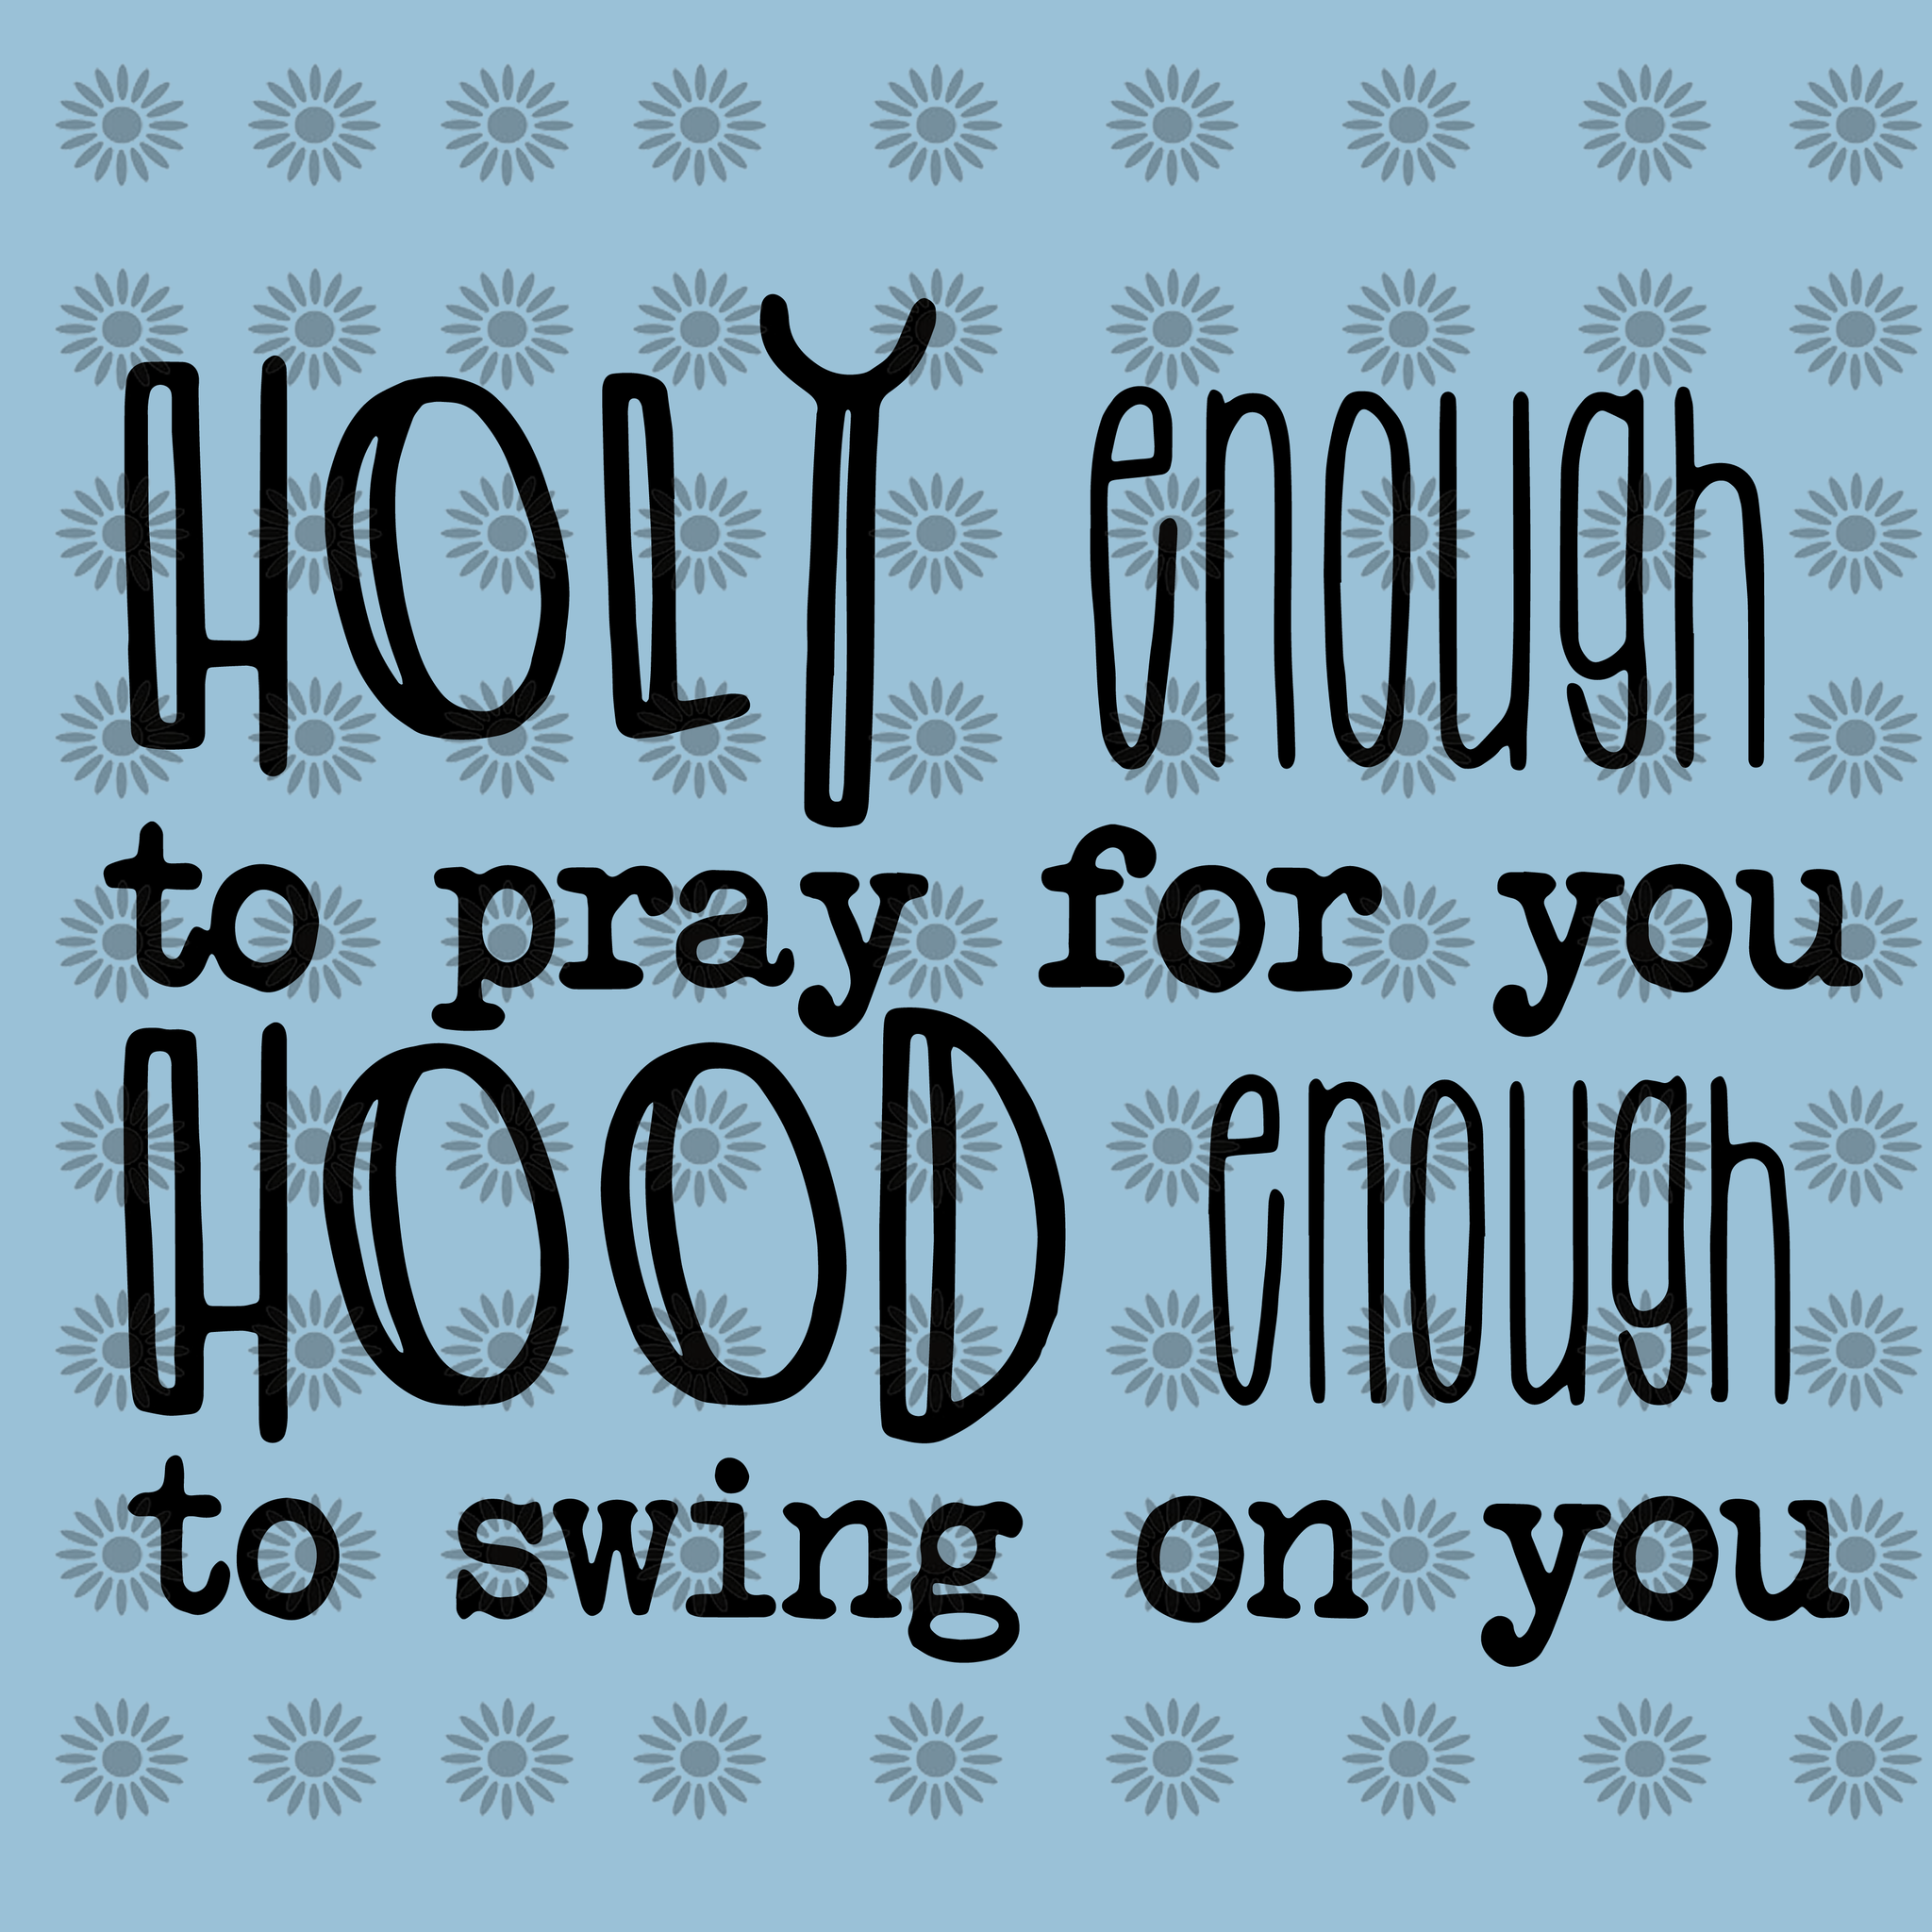 Holy enough to pray for you hood enough to swing on you svg, Holy enough to pray for you hood enough to swing on you, funny quotes svg, png, eps, dxf file